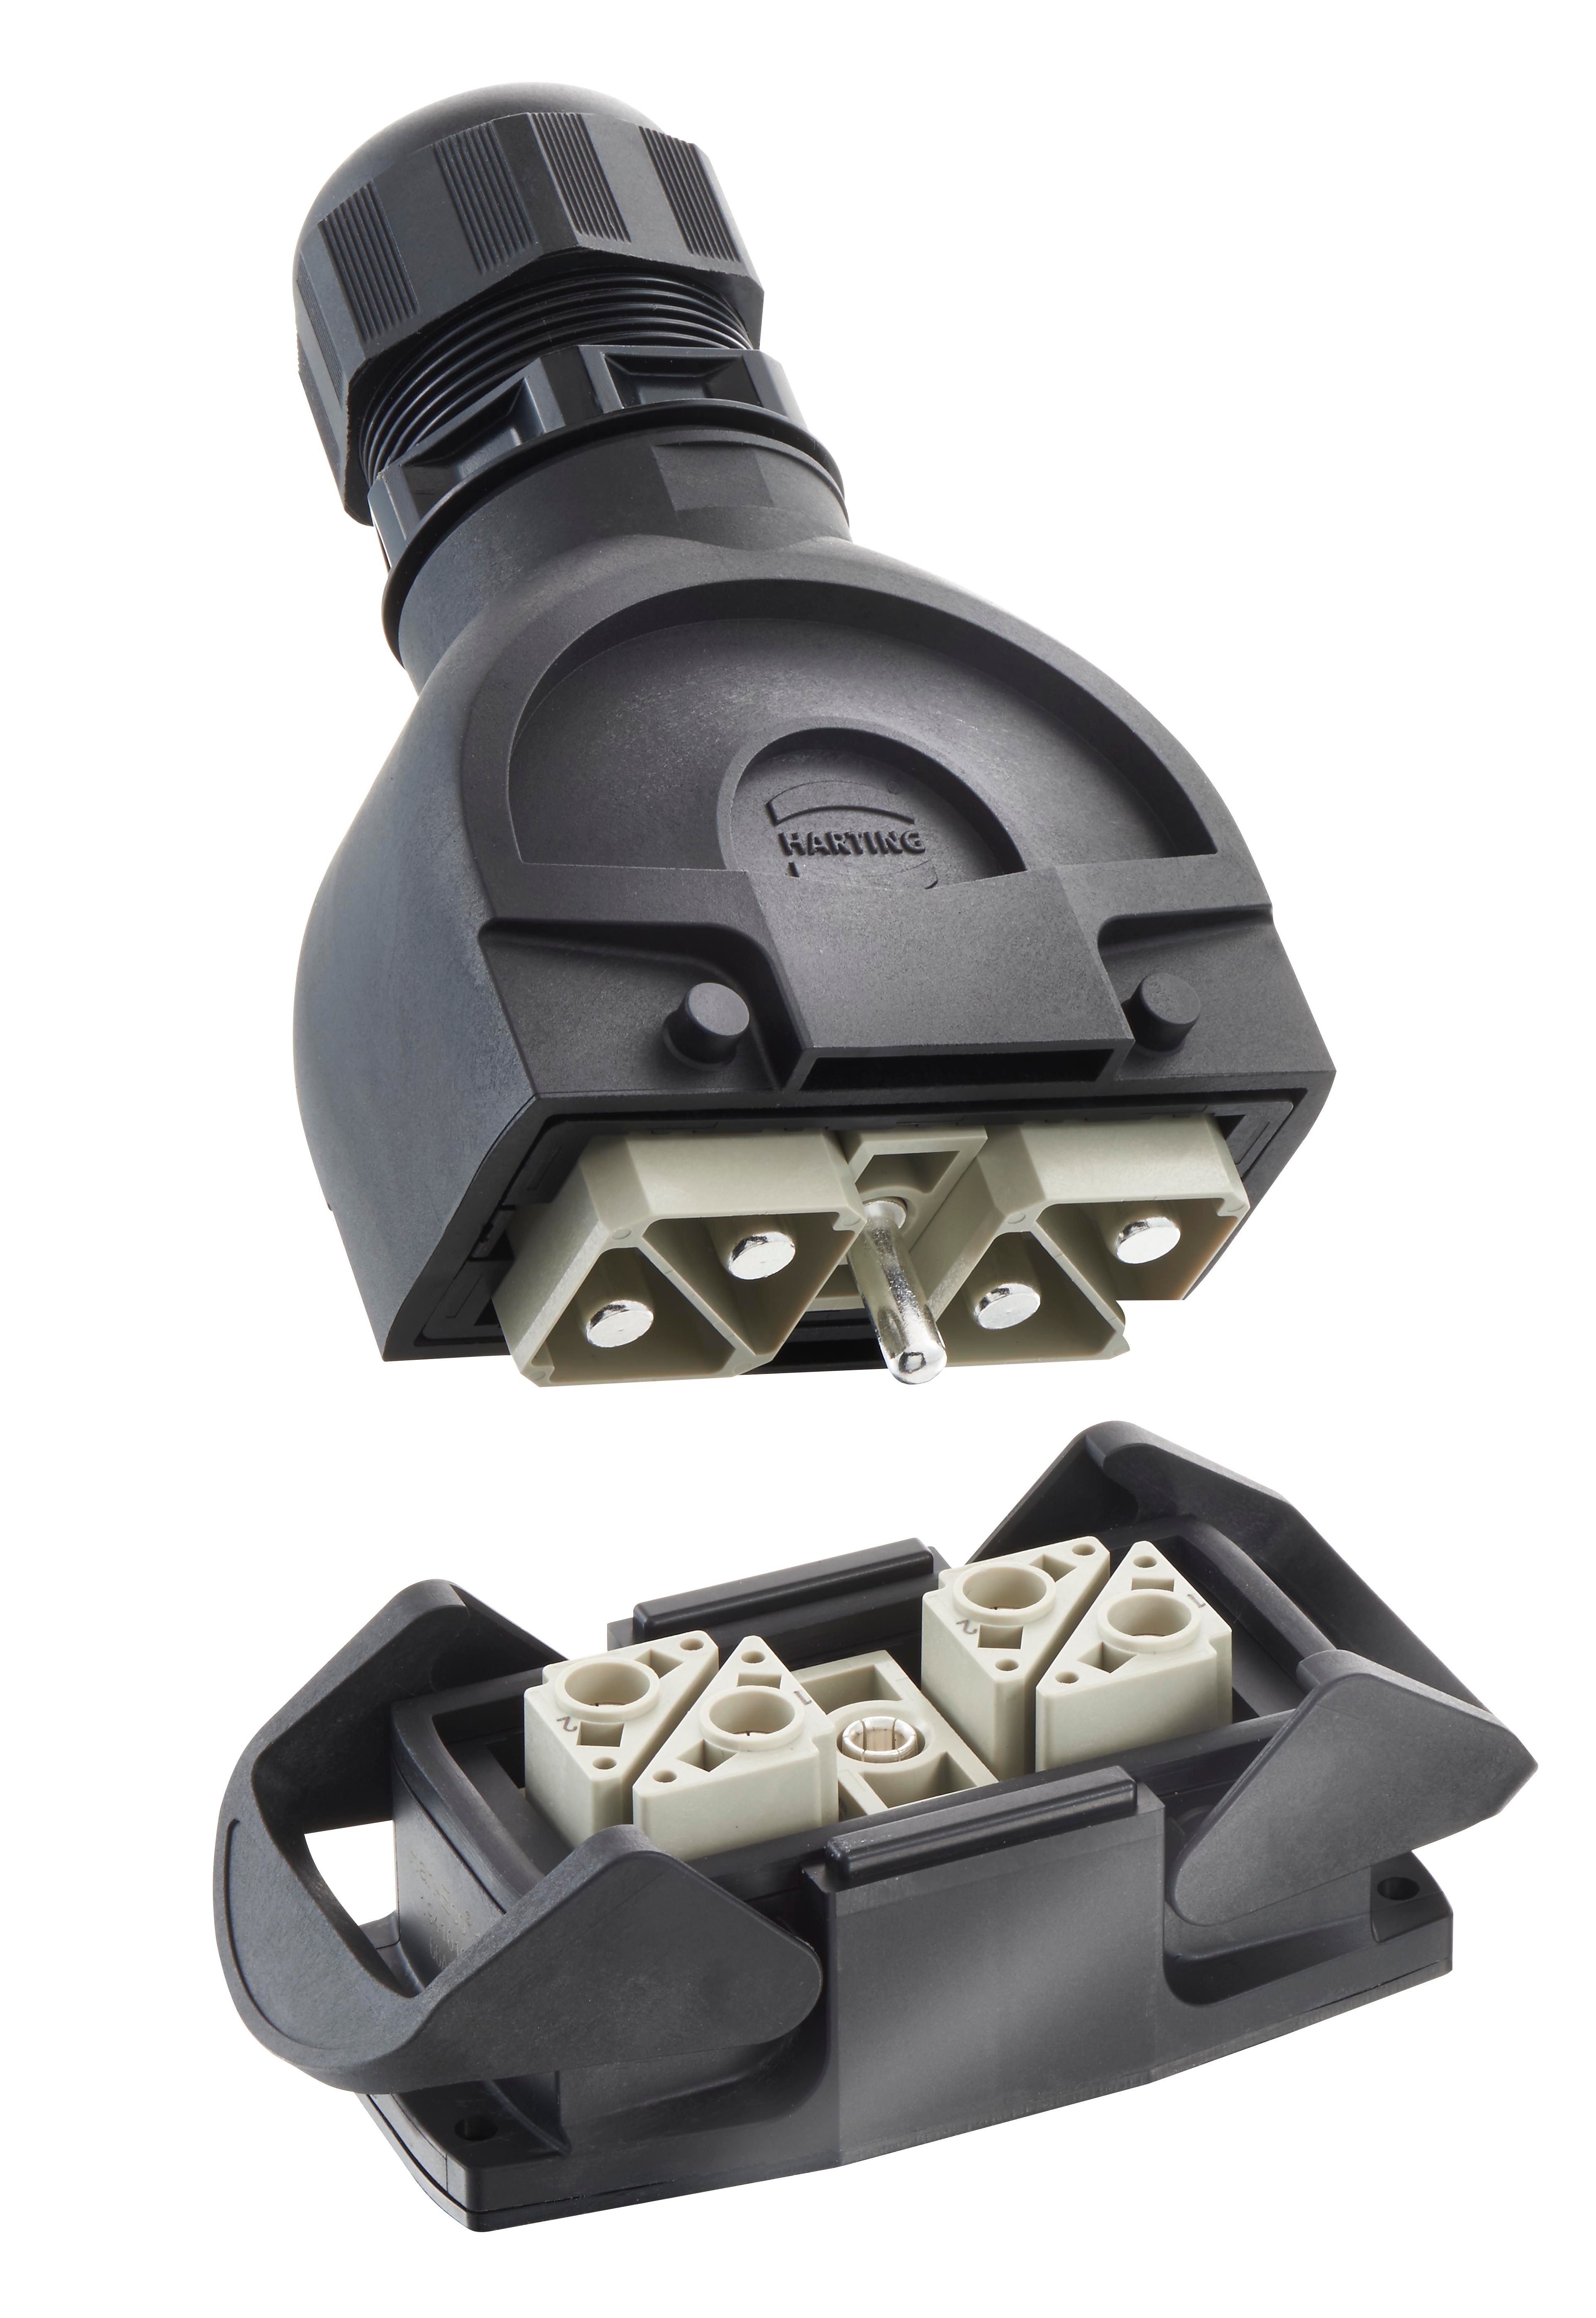 Reduce costs and wiring errors with Han-Eco® connectors